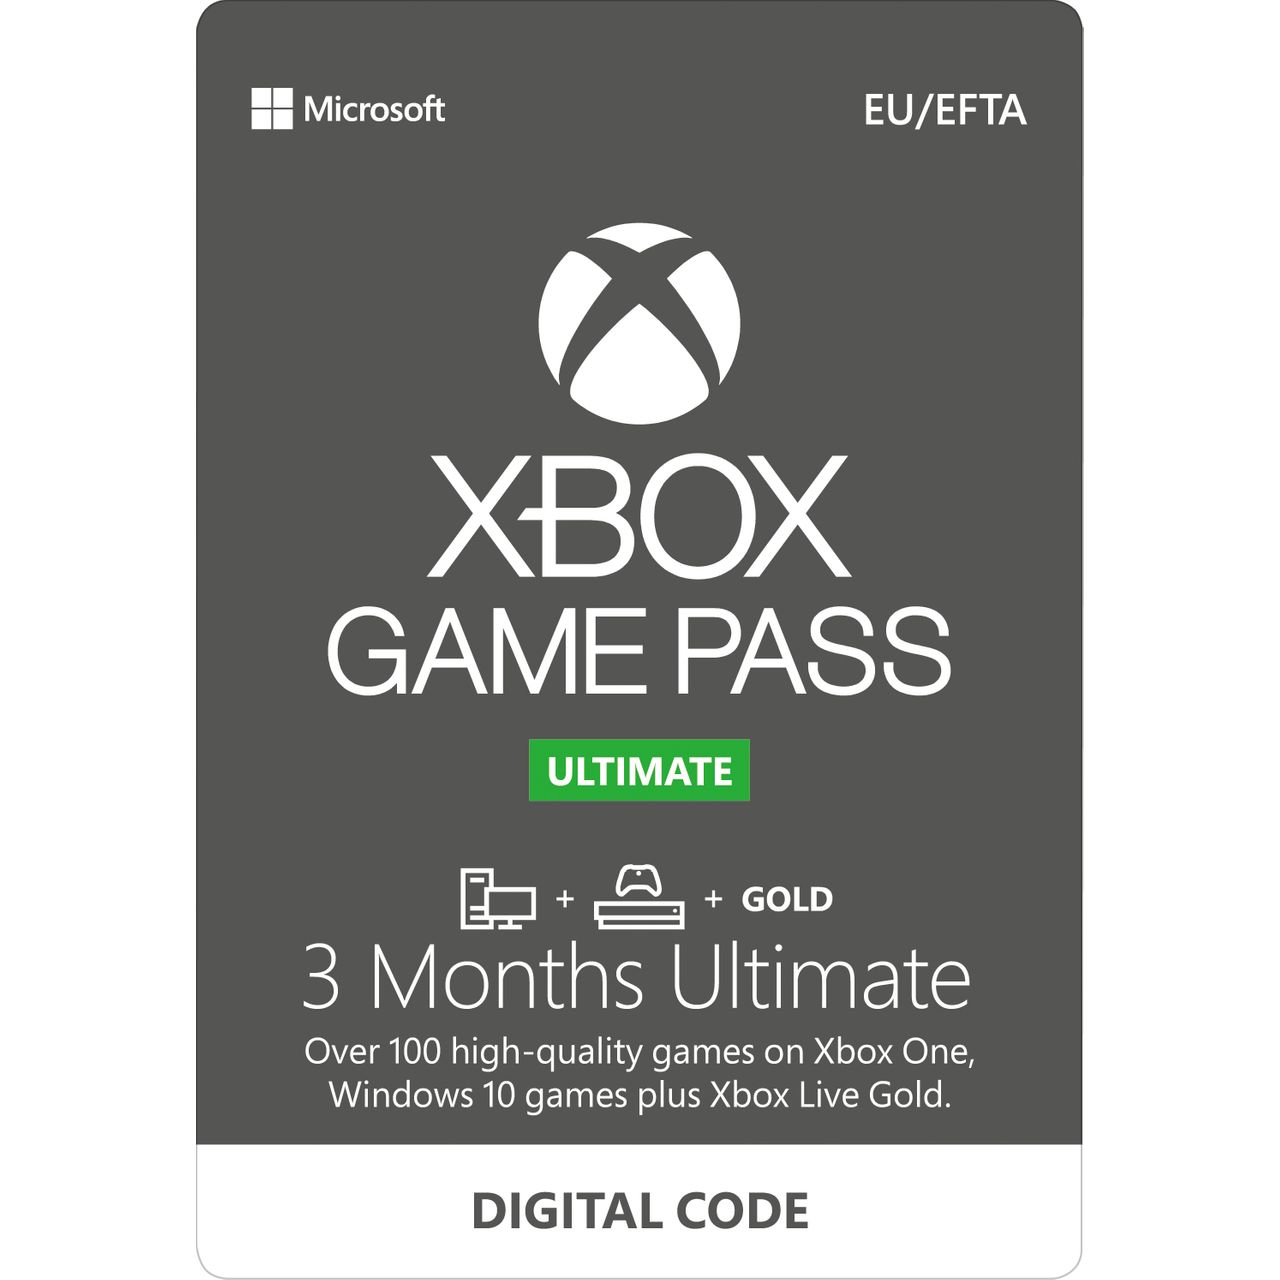 Xbox Game Pass for PC doubles in price on September 17